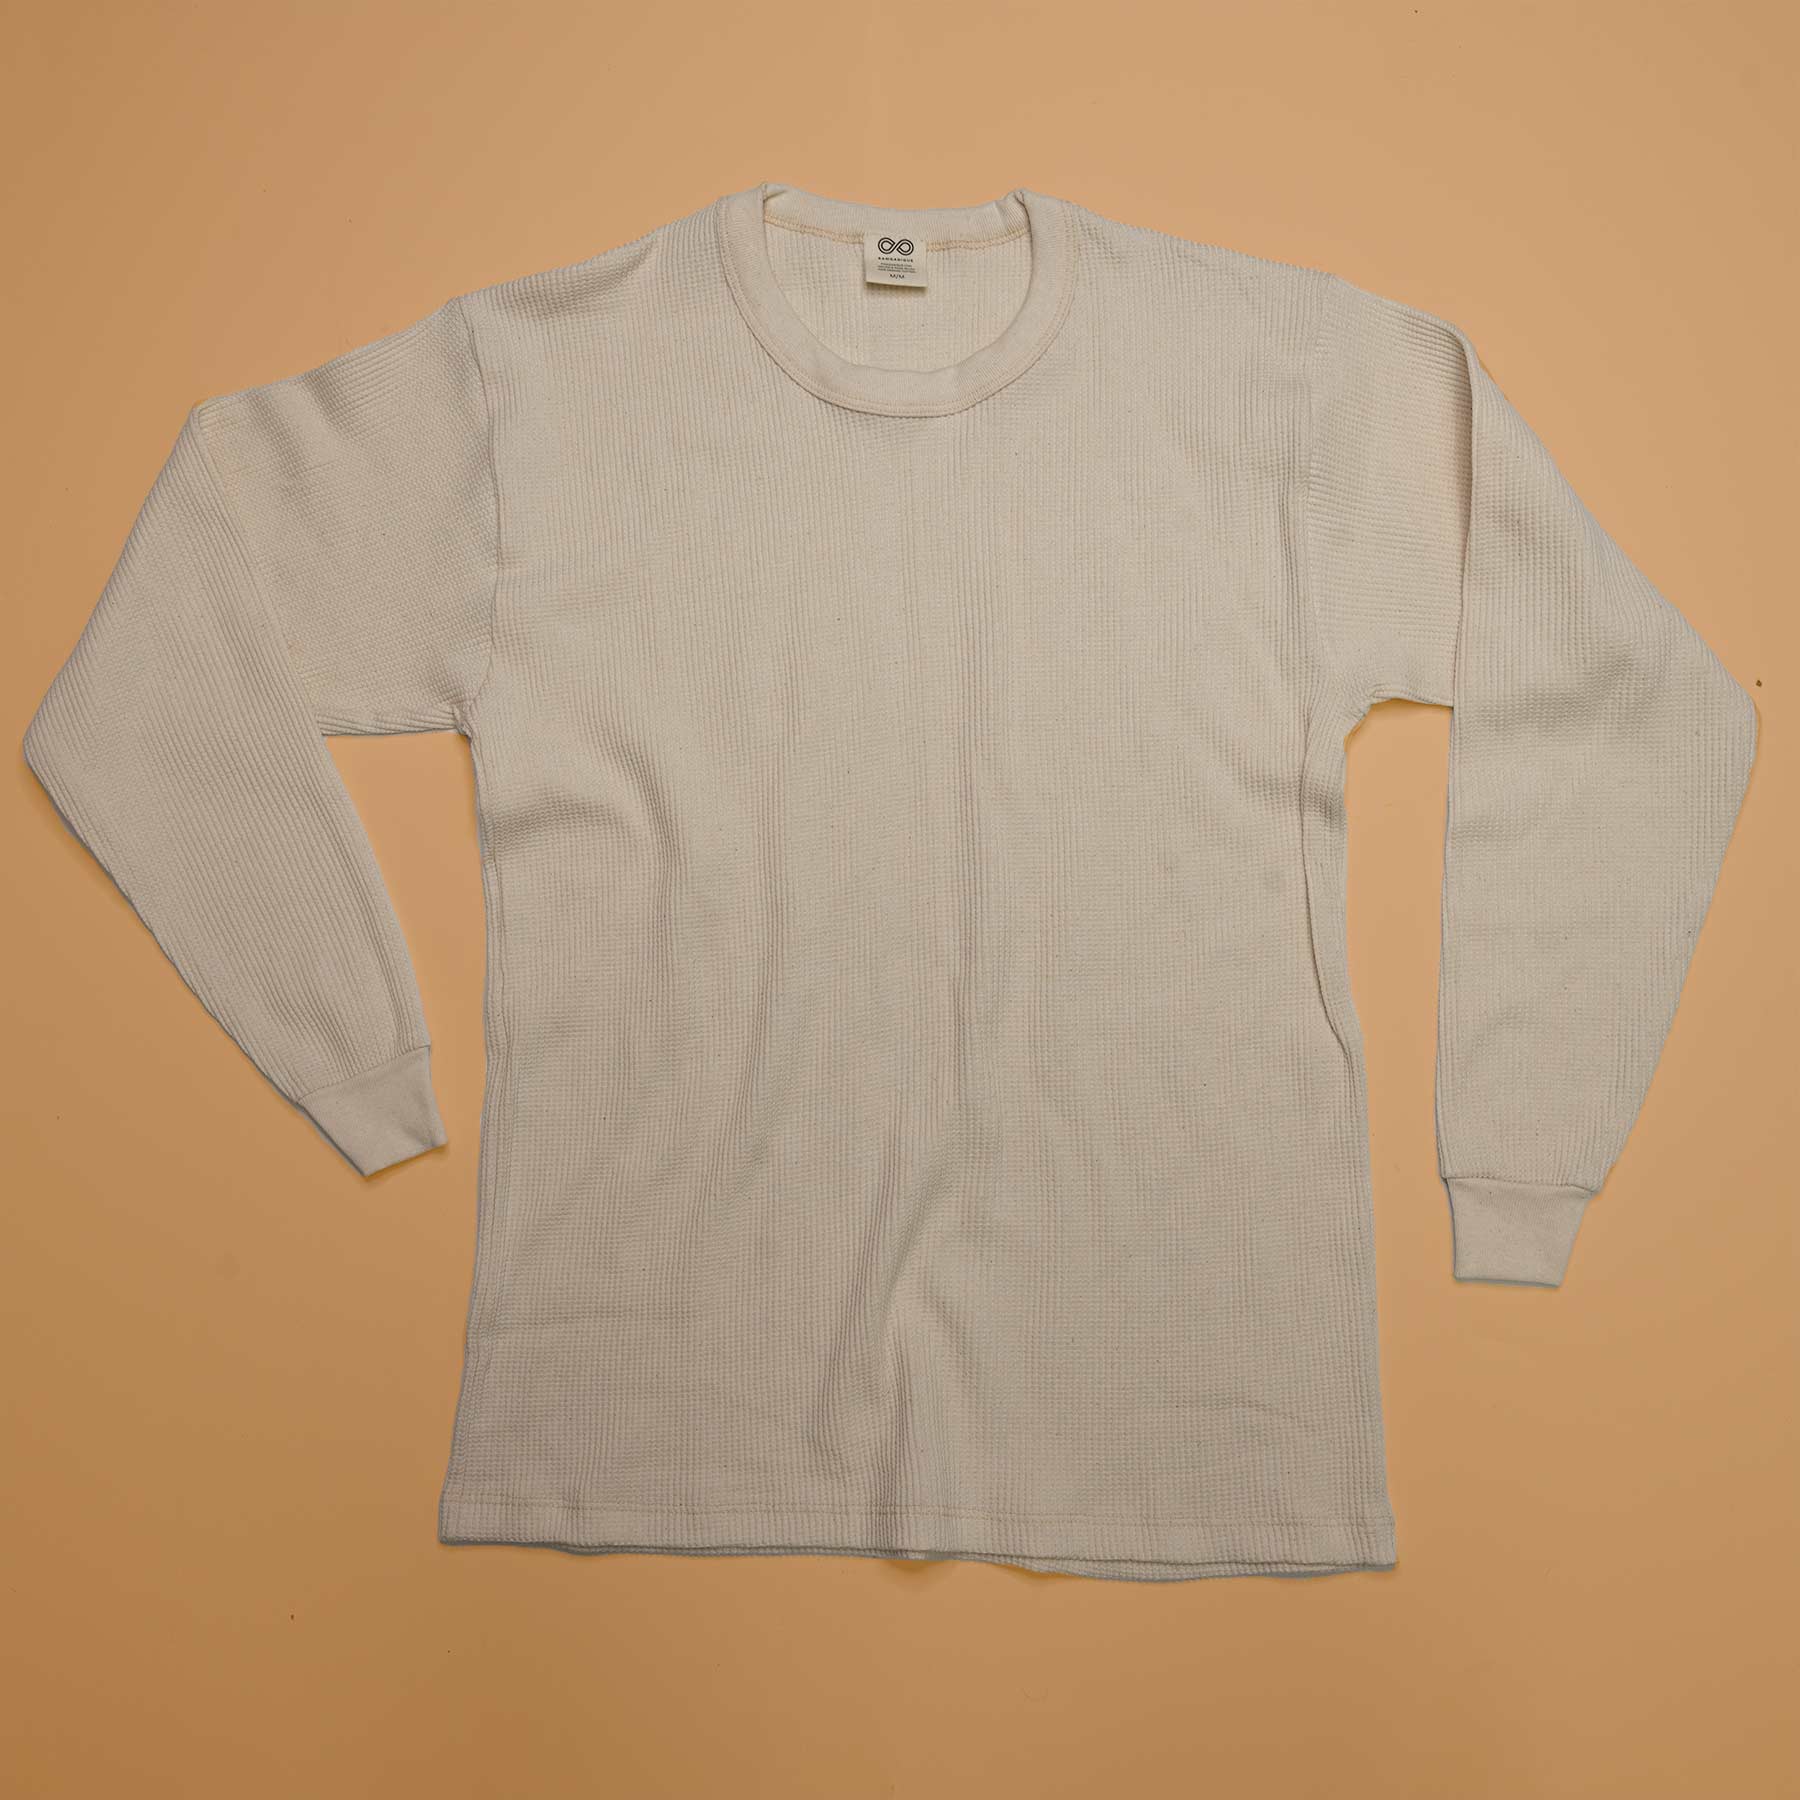 Made in USA 100% Organic Cotton Long-sleeve Crewneck T-shirt by 